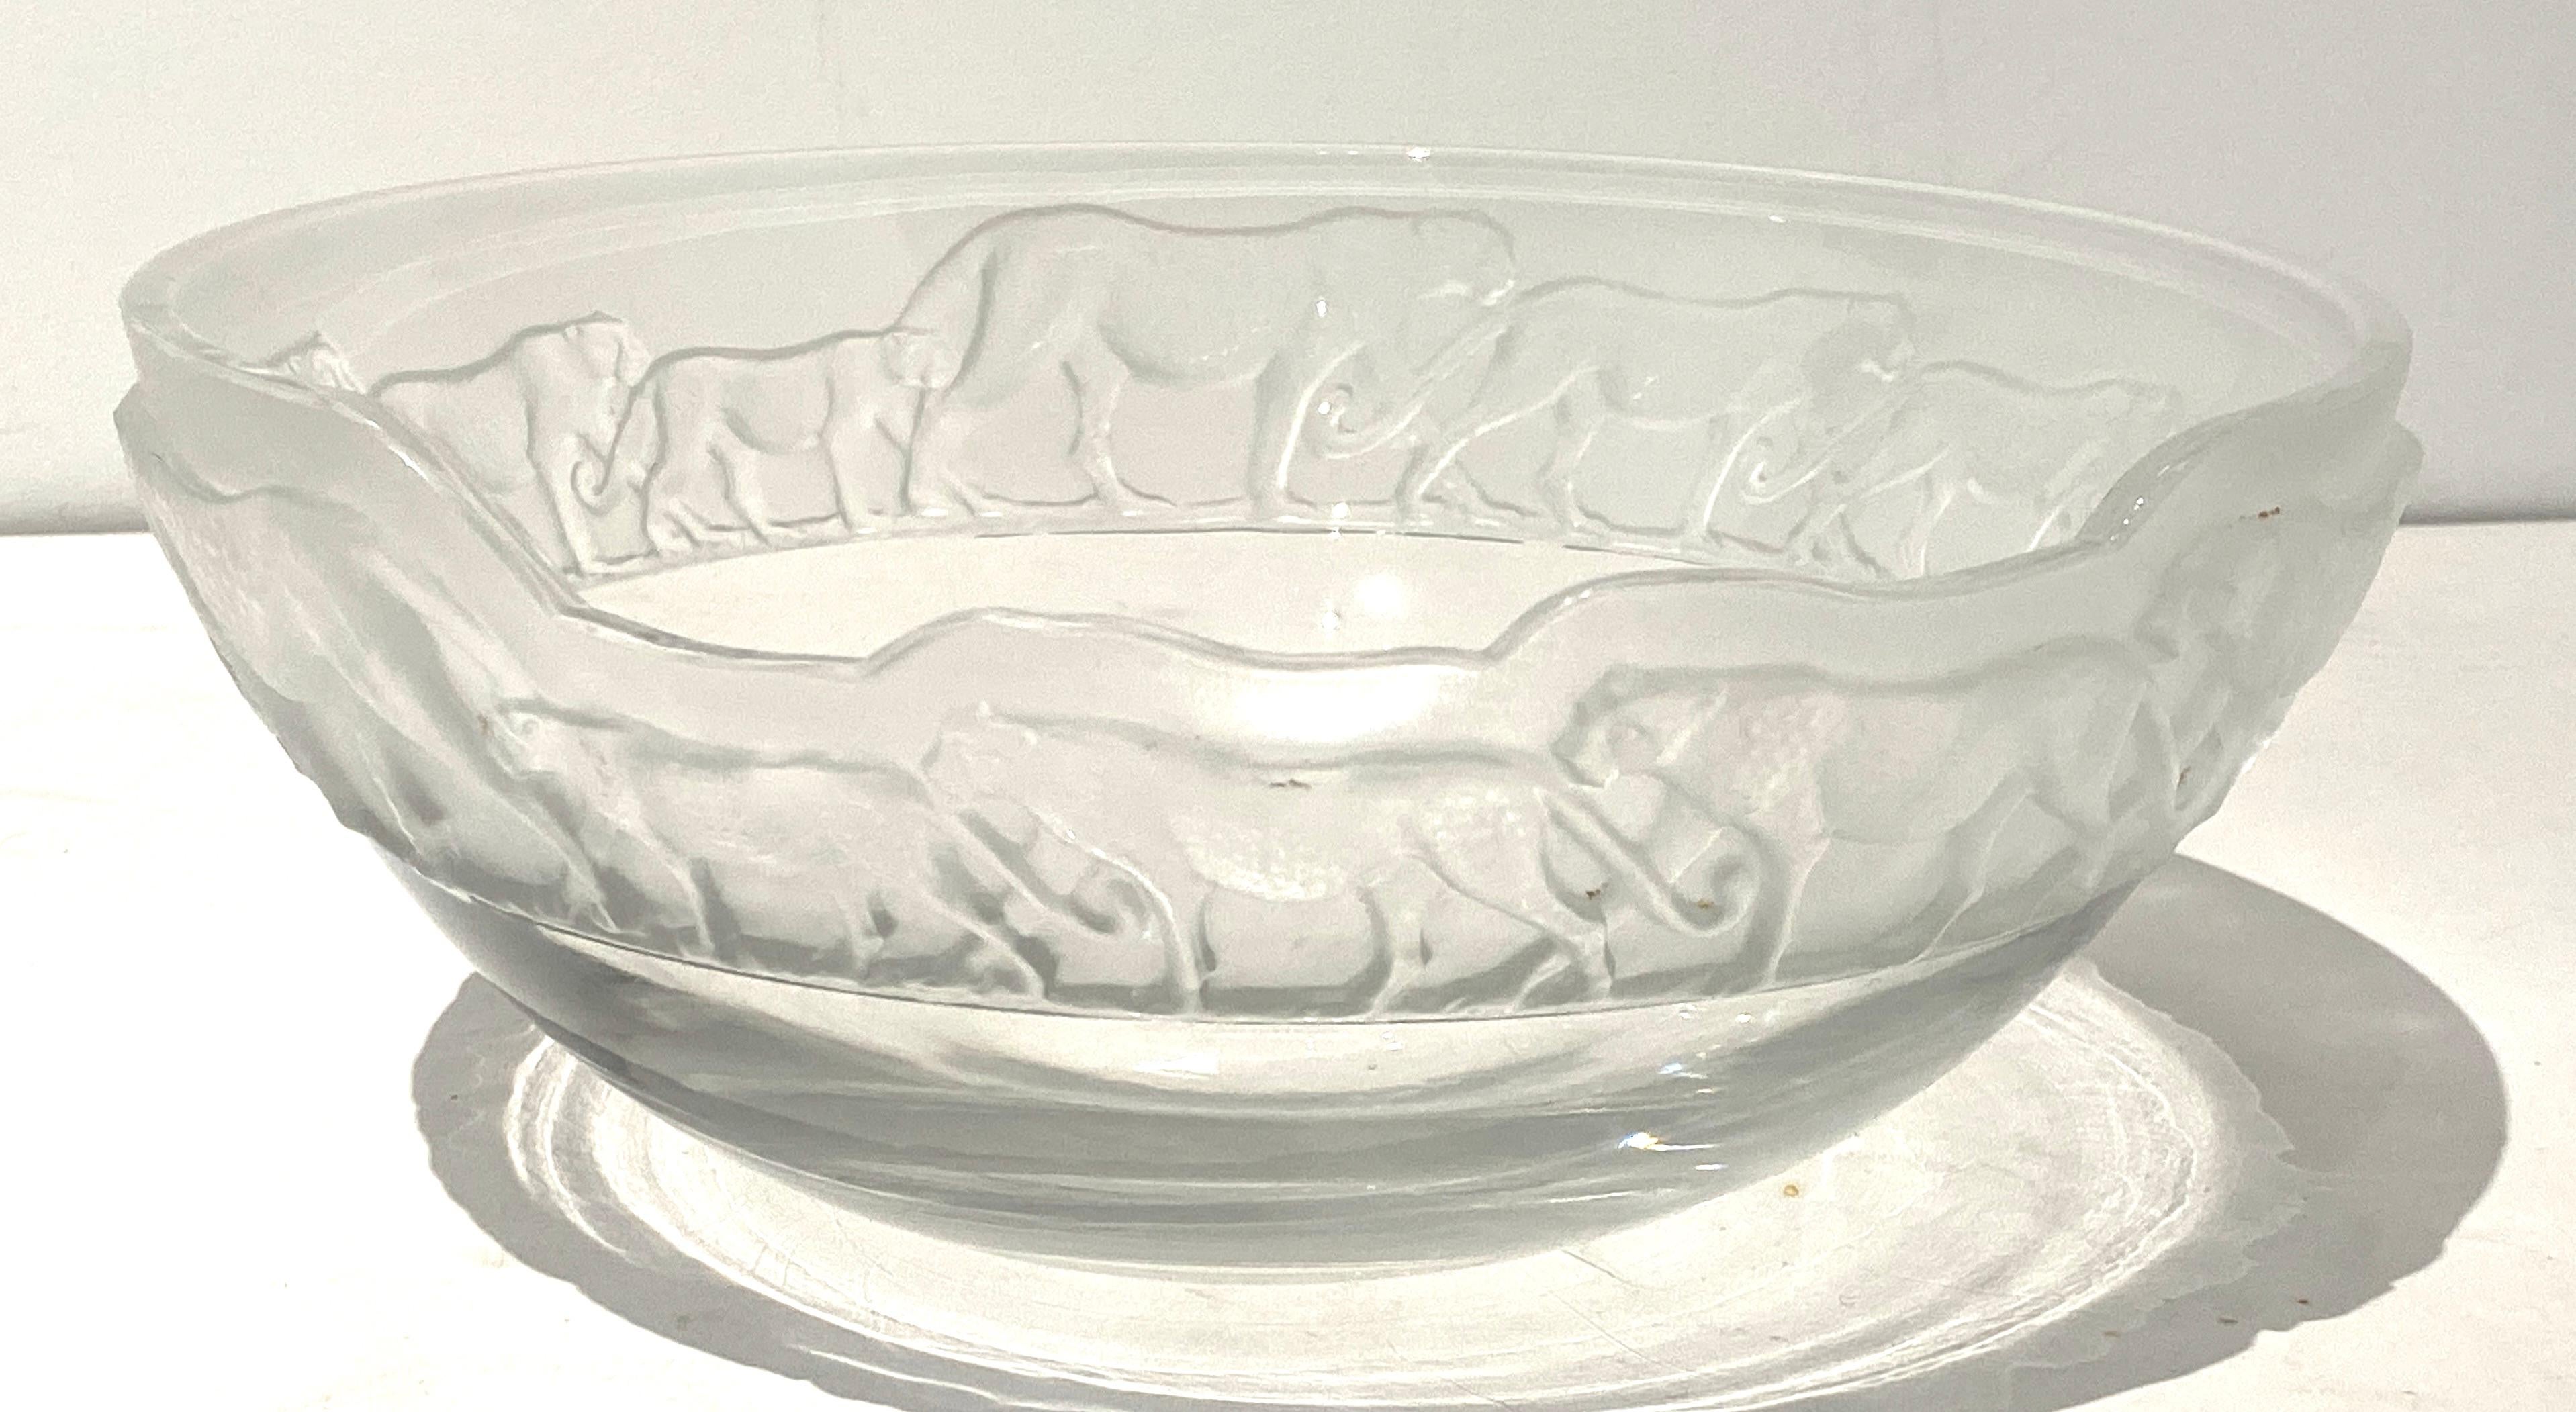 Art Deco Revival Nachtmann Safari Leopard bowl frosted and clear lead crystal from a Palm Beach estate. This bowl is hard to find and makes a chic display piece.

There is a very small surface scratch on the clear part of the bowl - see photo.